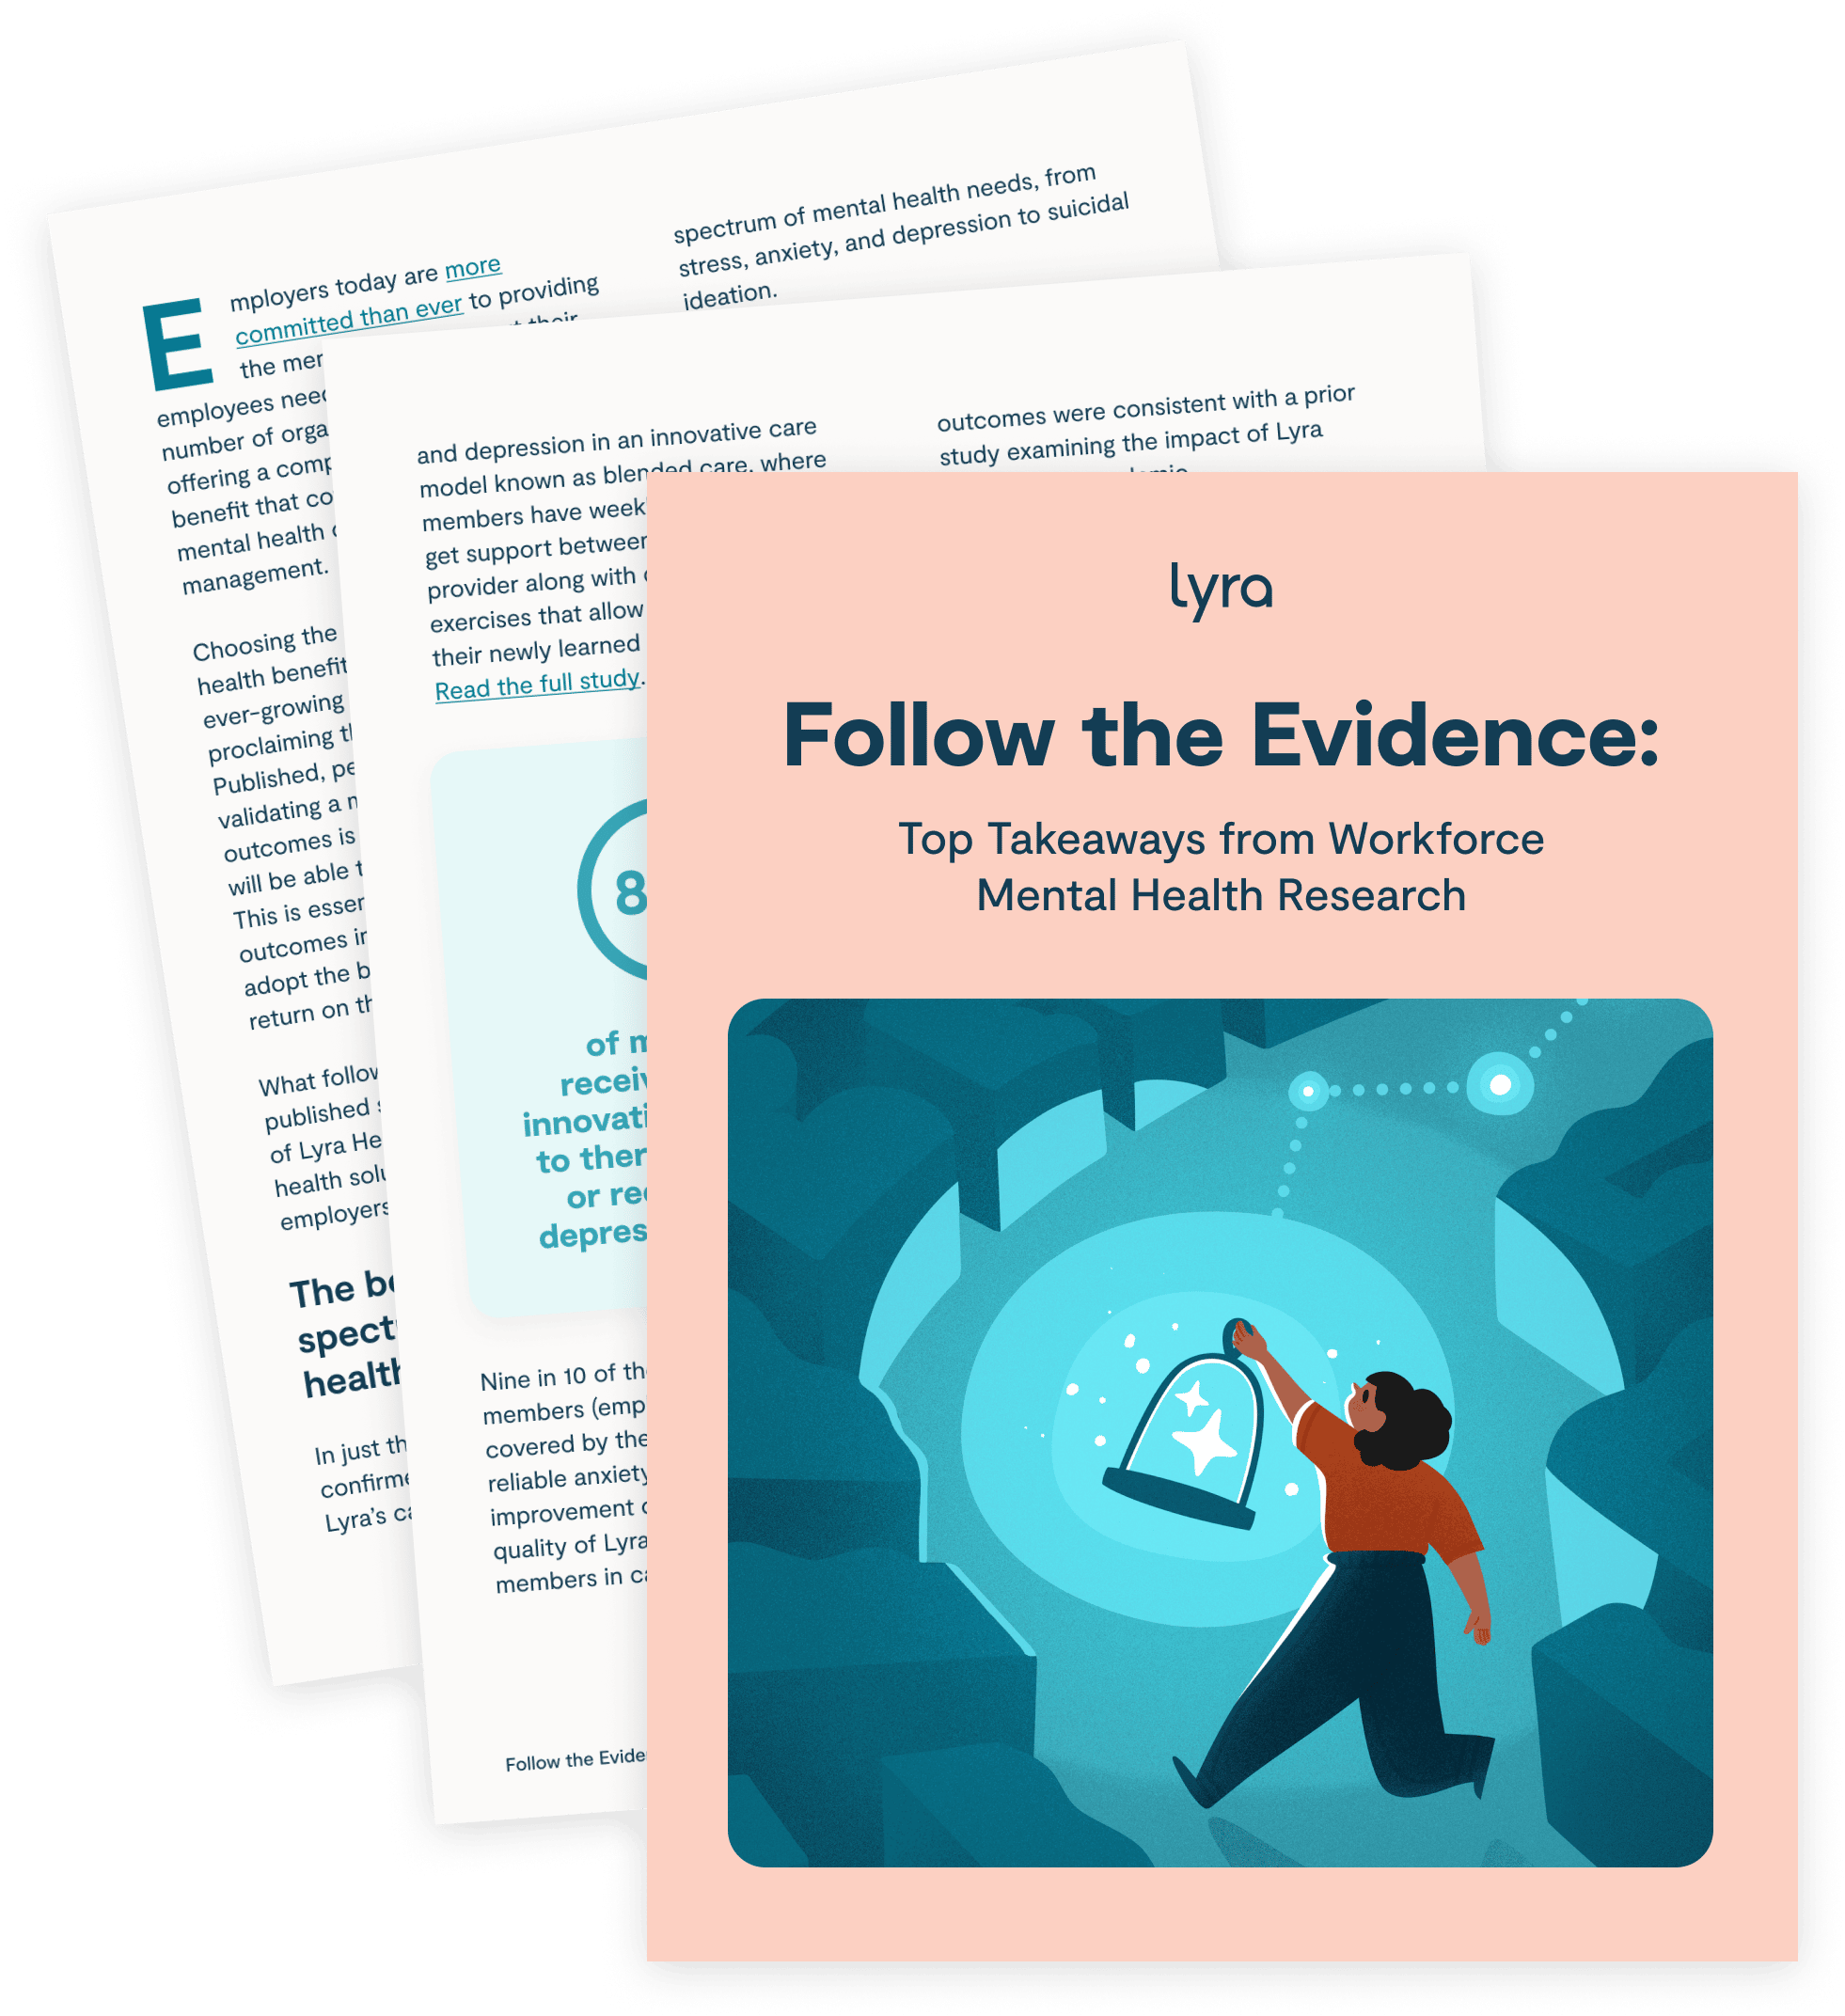 Follow the Evidence: Top Takeaways from Workforce Mental Health Research